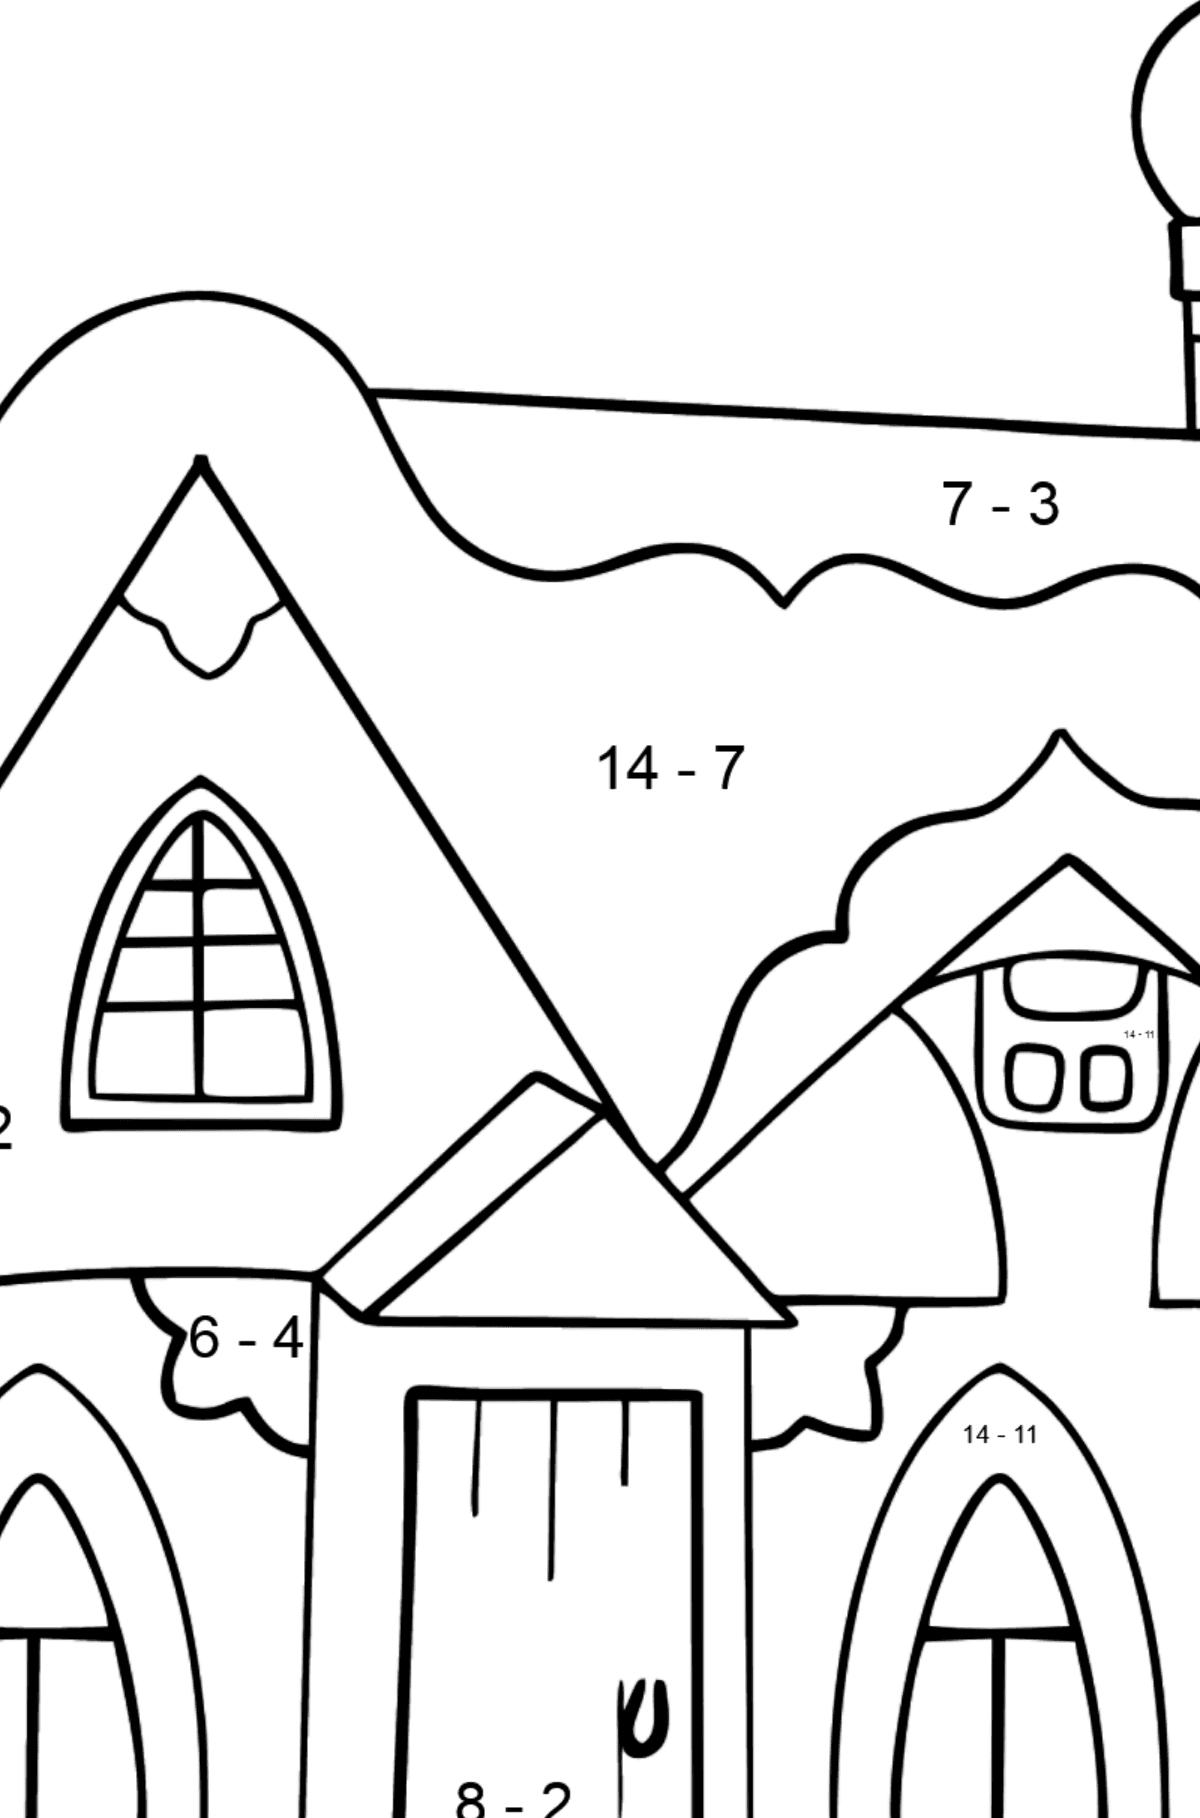 Simple Coloring Page - A Fairytale House - Math Coloring - Subtraction for Kids